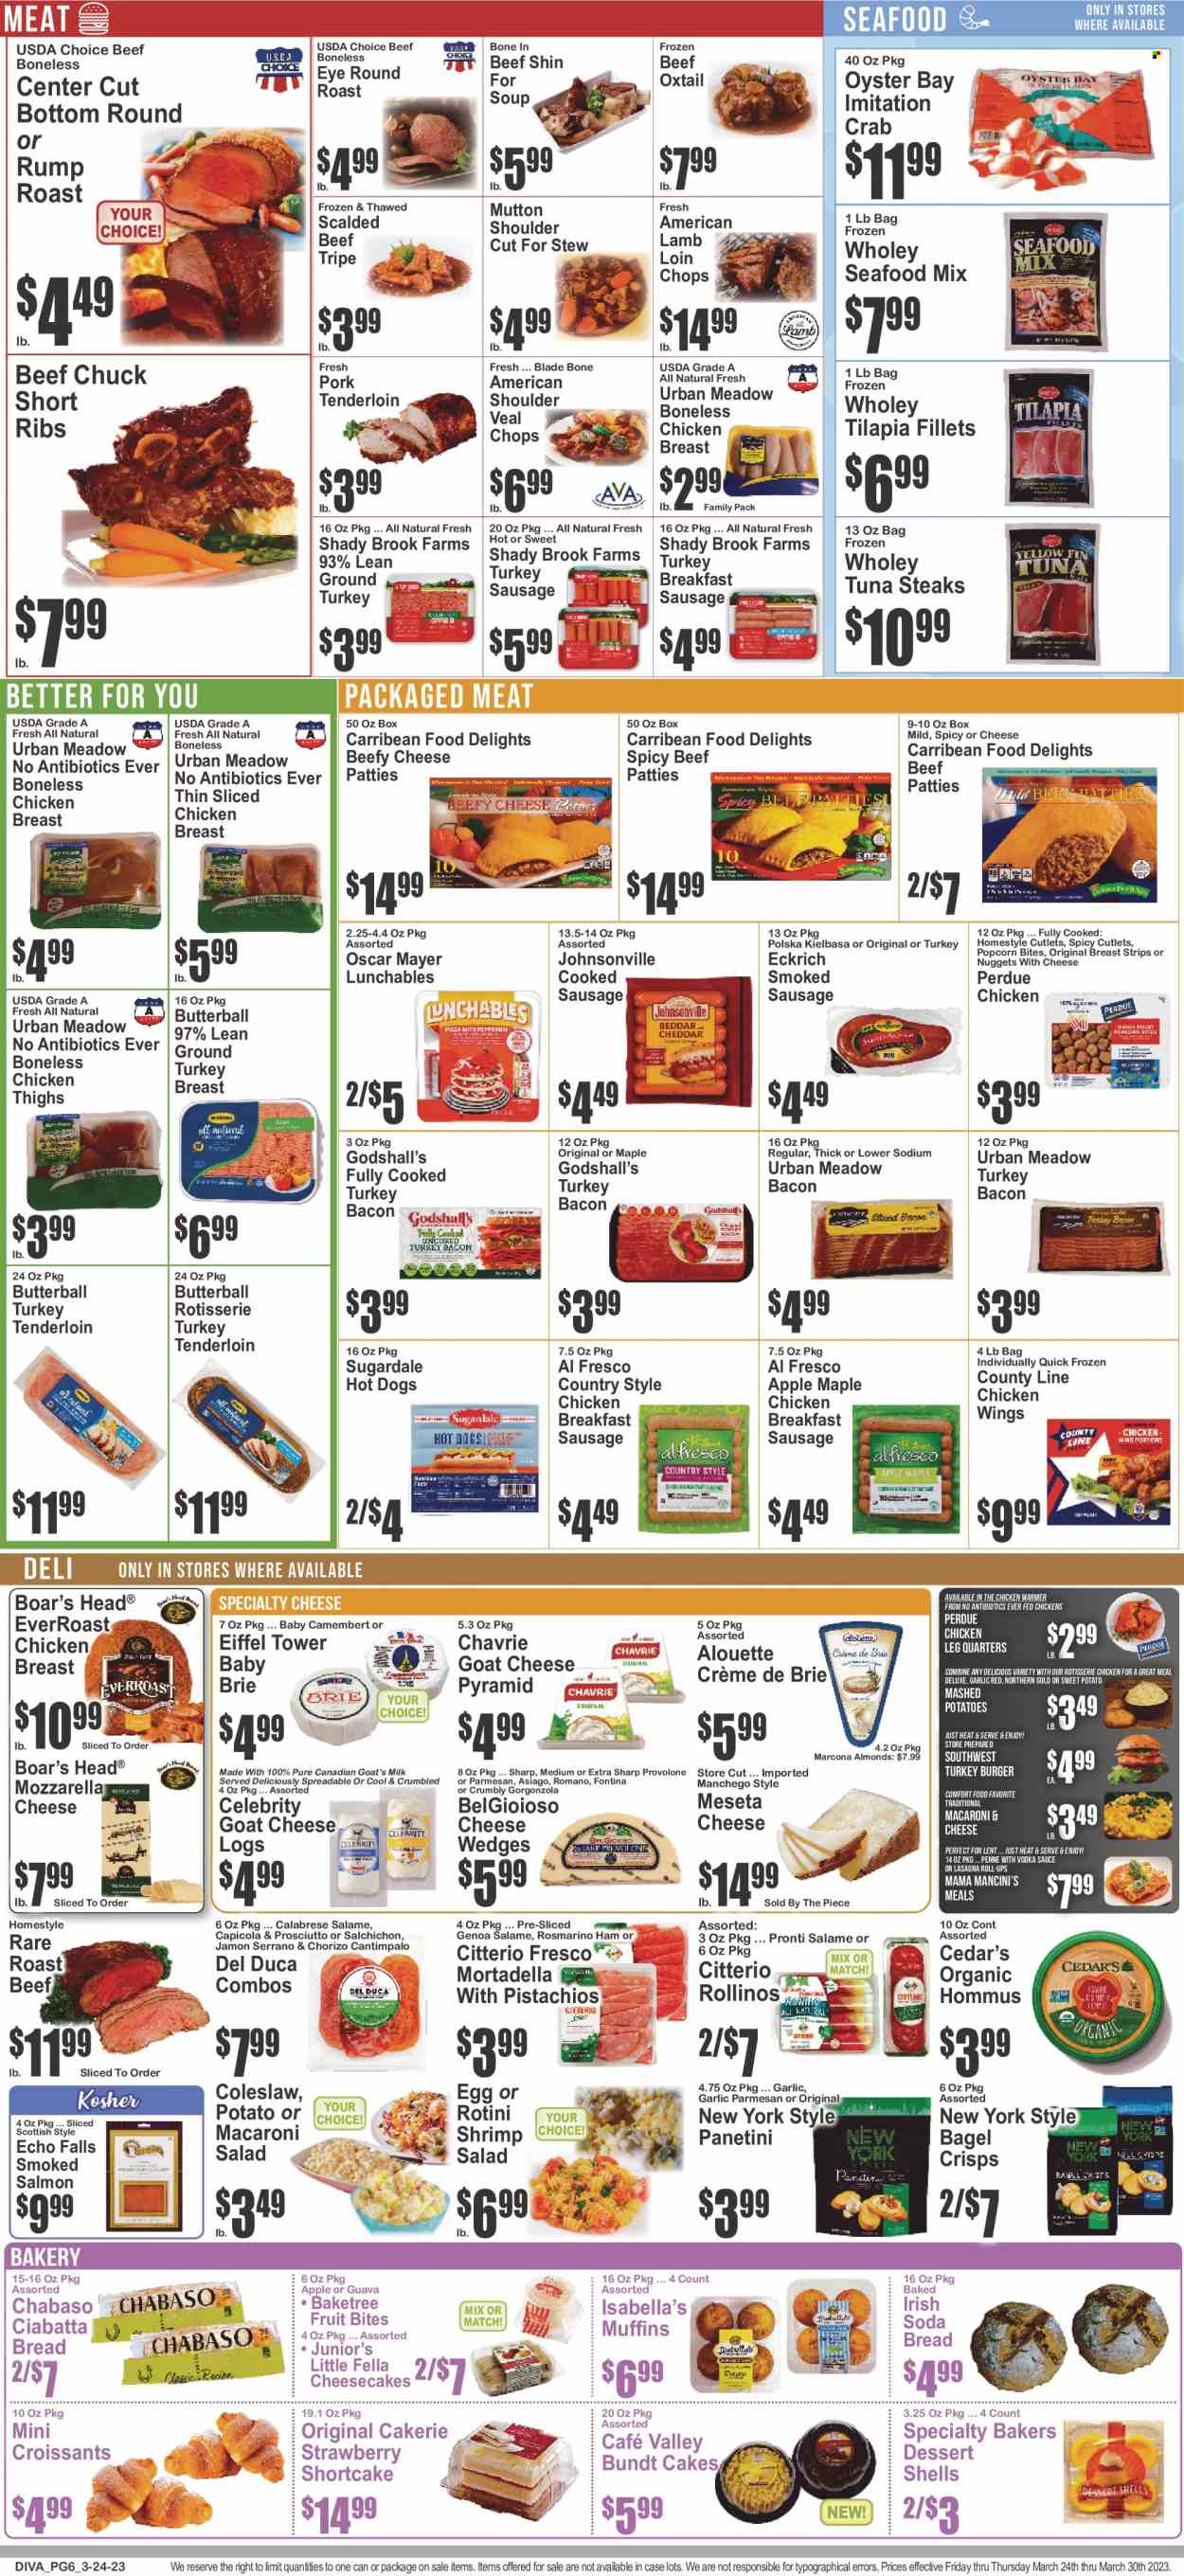 thumbnail - Food Dynasty Flyer - 03/24/2023 - 03/30/2023 - Sales products - bread, ciabatta, cake, croissant, soda bread, bundt, muffin, dessert shells, sweet potato, salad, guava, salmon, smoked salmon, tilapia, tuna, oysters, seafood, crab, shrimps, coleslaw, macaroni & cheese, mashed potatoes, hot dog, chicken roast, soup, nuggets, hamburger, Perdue®, Lunchables, Sugardale, roast, bacon, Butterball, mortadella, turkey bacon, ham, prosciutto, Johnsonville, Oscar Mayer, sausage, smoked sausage, kielbasa, hummus, macaroni salad, asiago, camembert, Fontina, goat cheese, Manchego, mozzarella, brie, gorgonzola, Provolone, milk, eggs, chicken wings, strips, popcorn, bagel crisps, penne, almonds, vodka, ground turkey, turkey breast, chicken breasts, chicken legs, chicken thighs, turkey tenderloin, chicken, beef meat, beef ribs, beef tripe, veal cutlet, veal meat, oxtail, steak, round roast, roast beef, ribs, turkey burger, pork meat, pork tenderloin, lamb loin, lamb meat, mutton meat, Bakers. Page 6.